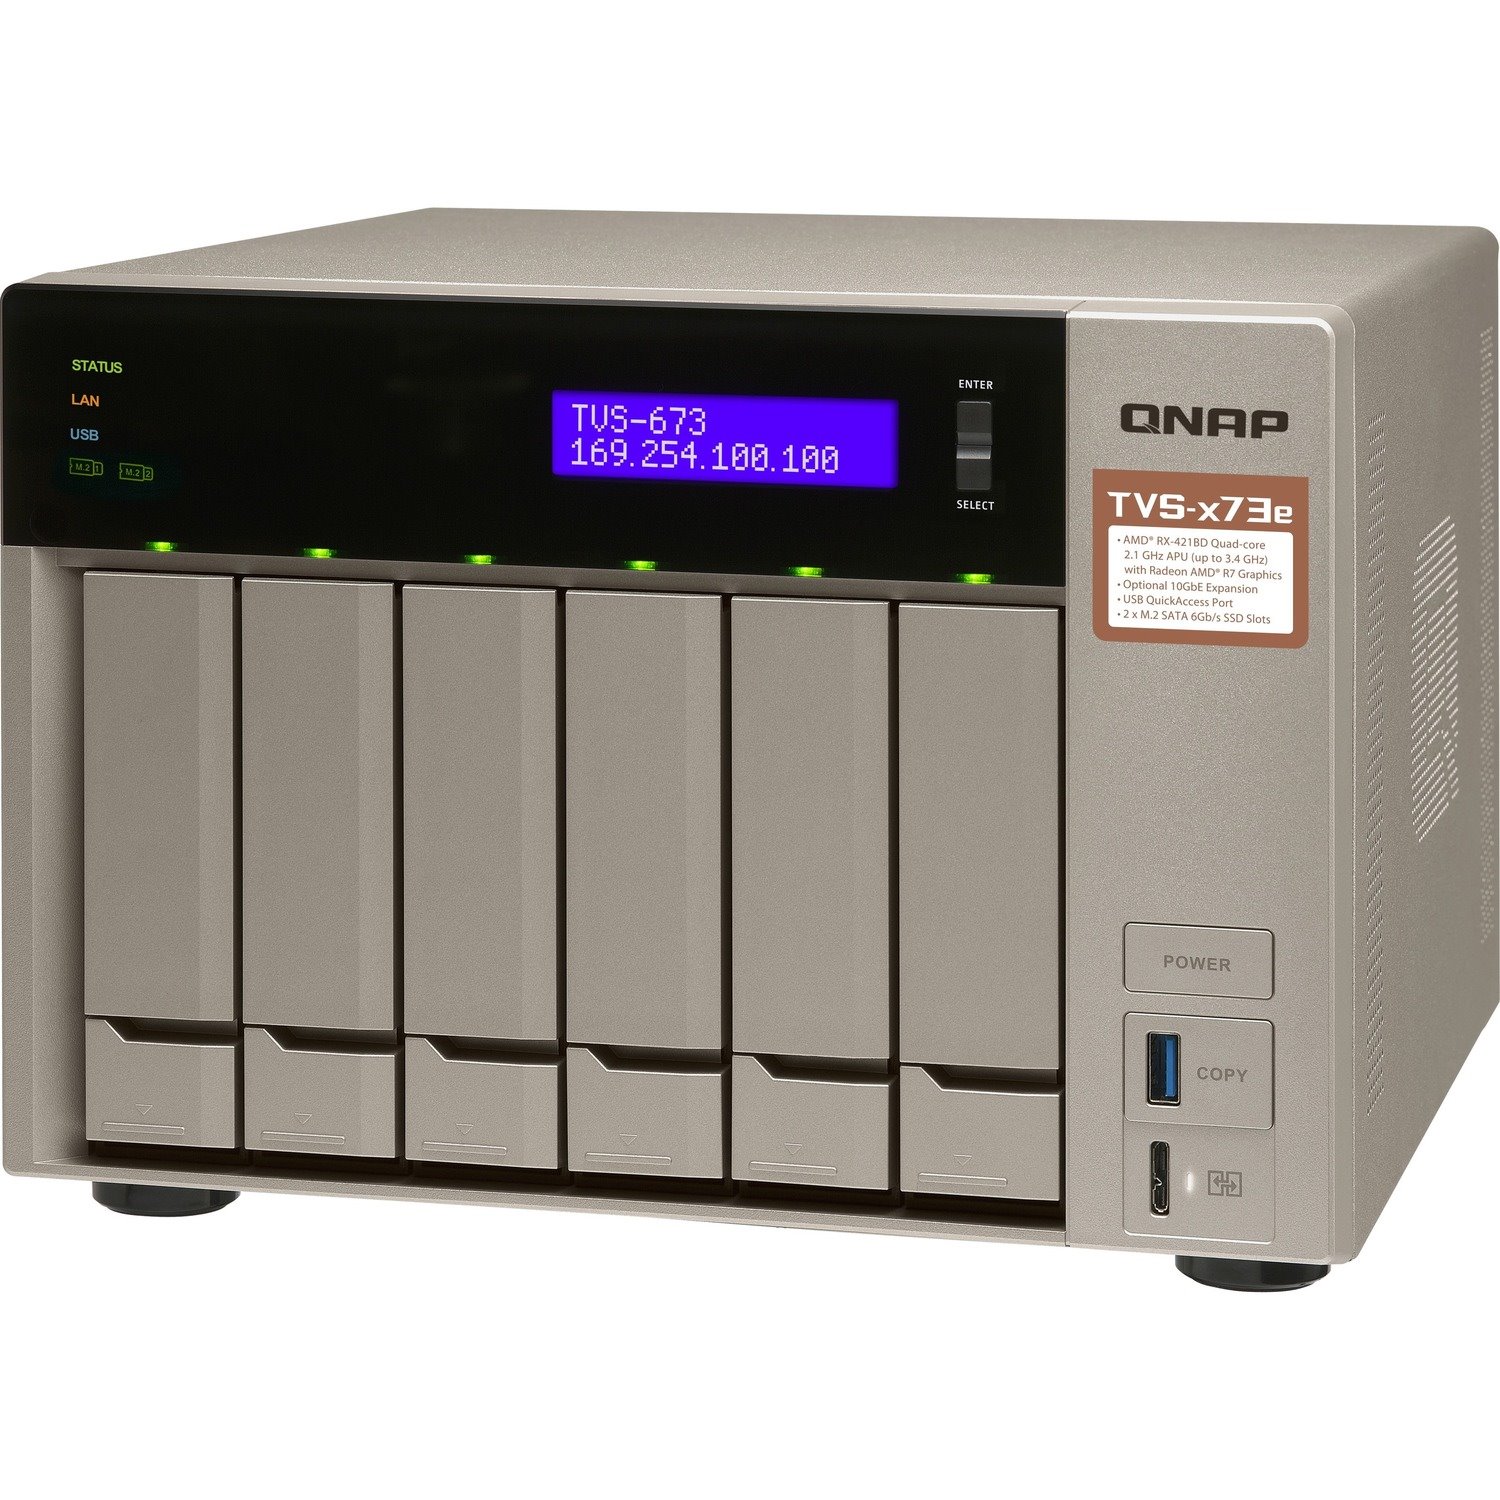 QNAP Powerful NAS with AMD RX-421BD Quad-Core APU and PCIe Expandability